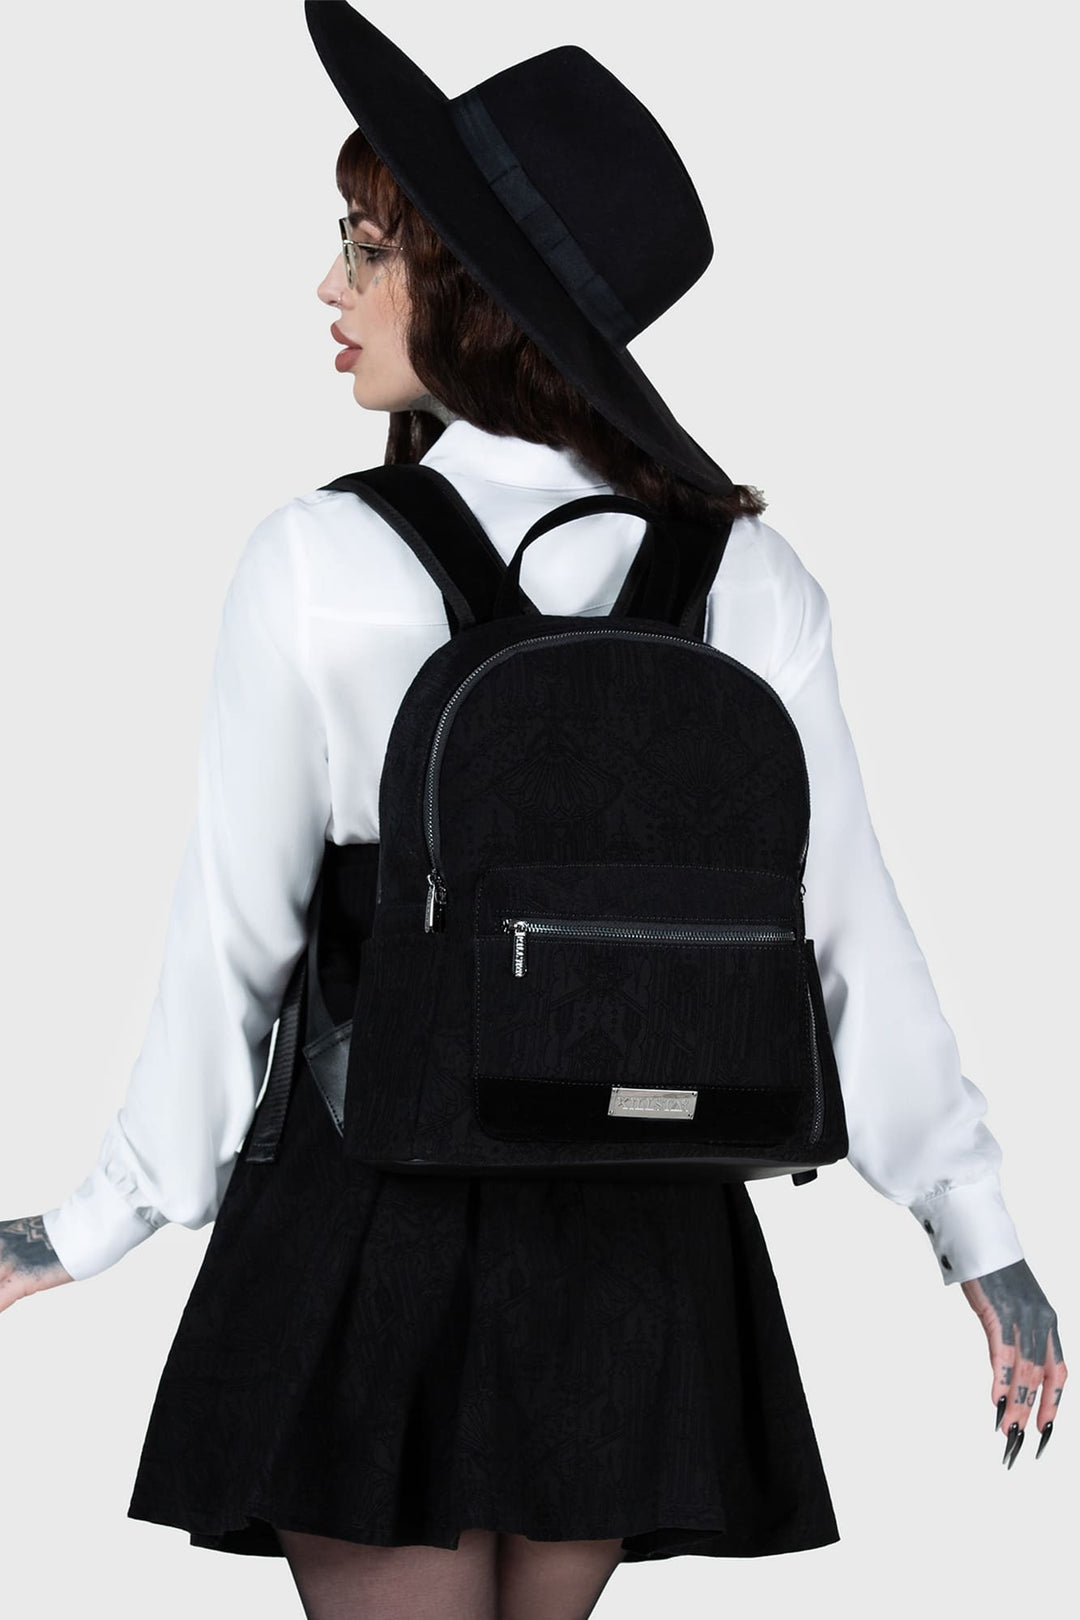 women wearing a gothic backpack